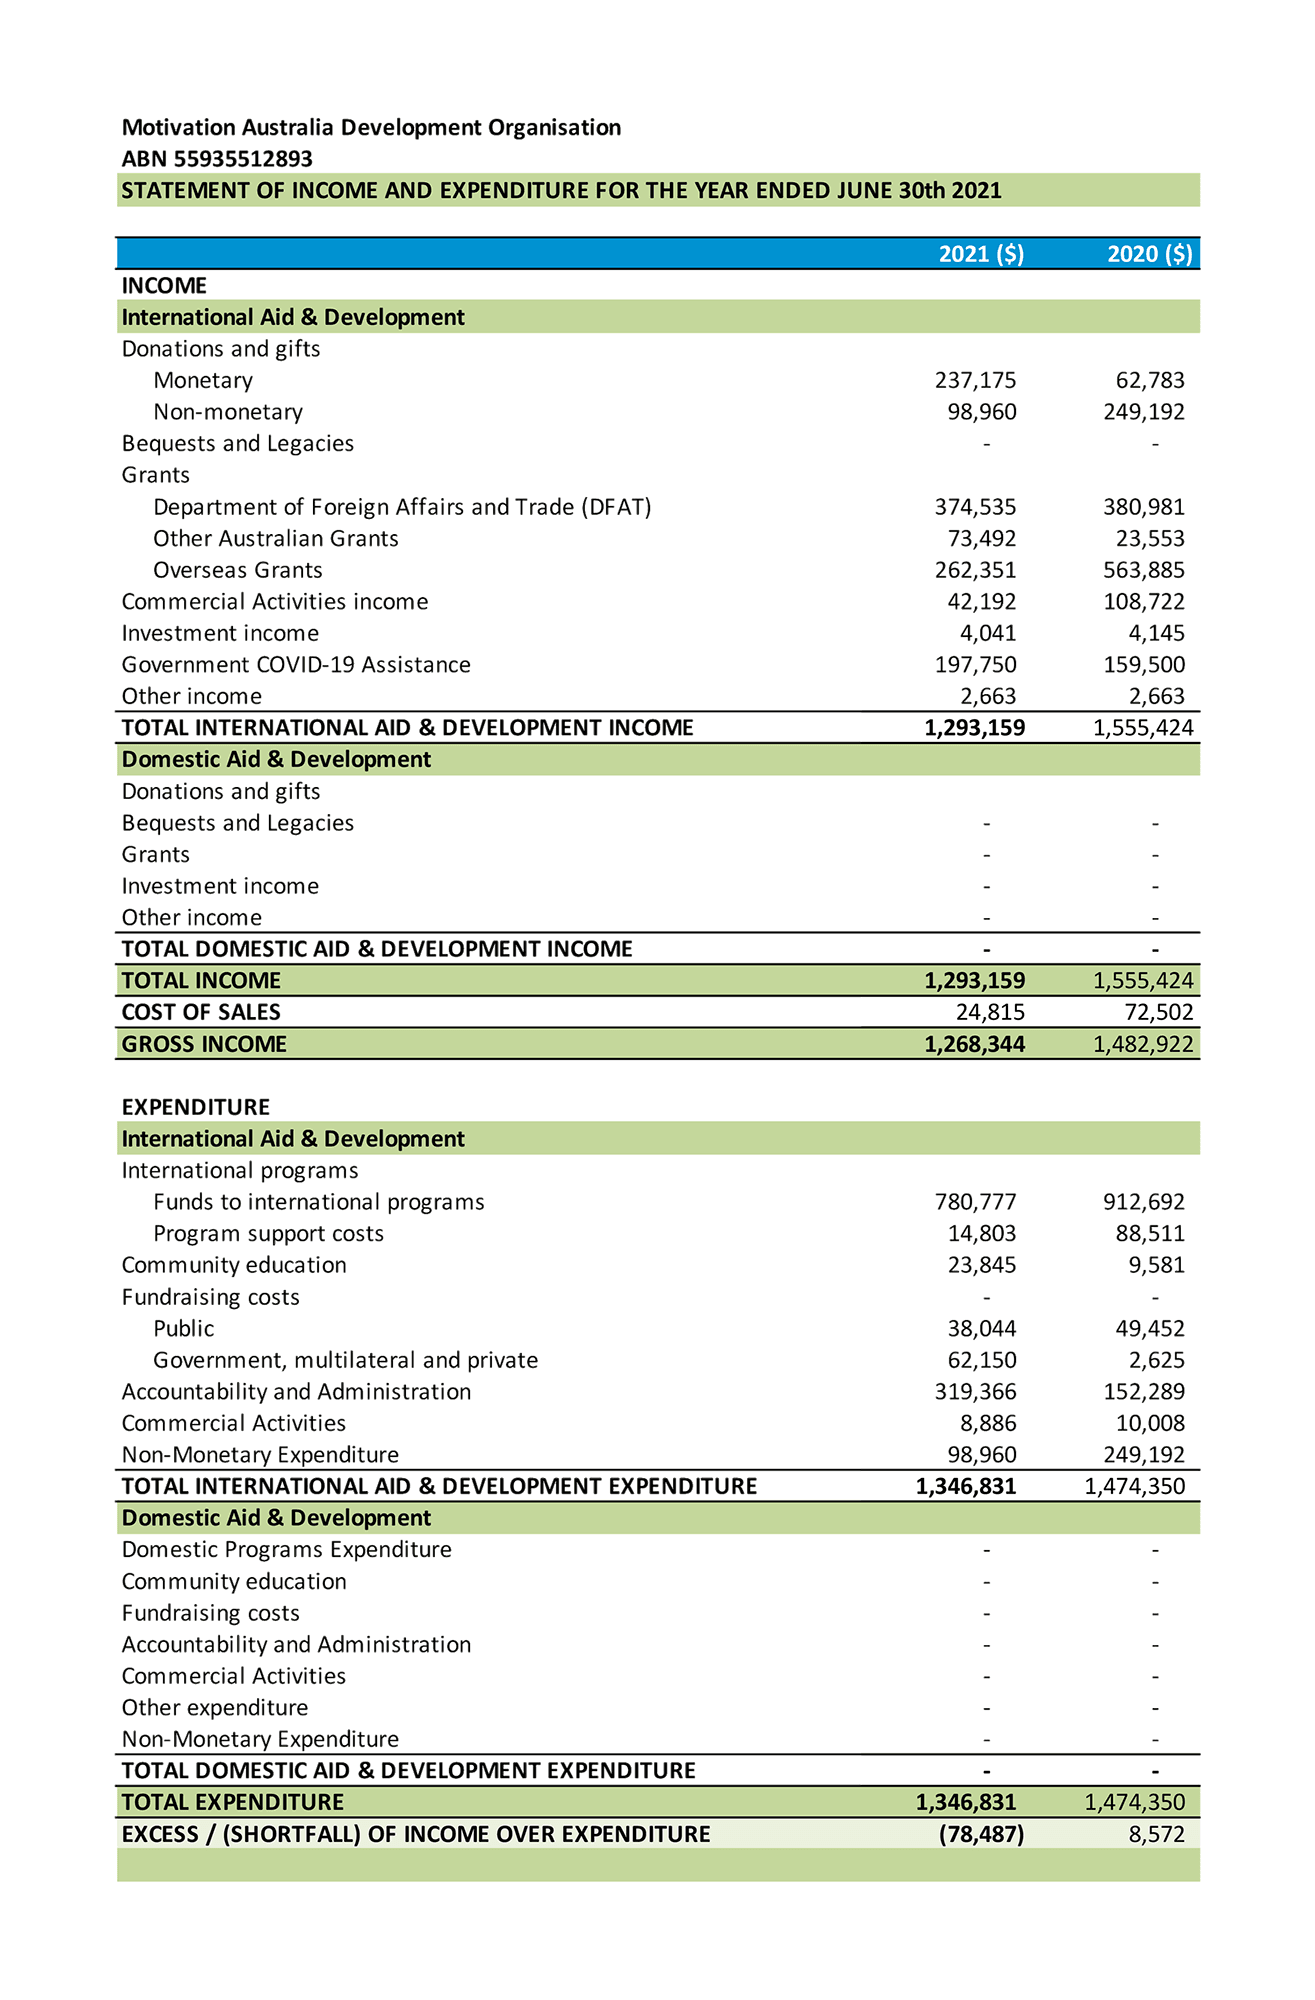 Motivation Australia Summary Statement of Income and Expenditure for 2020 to 2021.